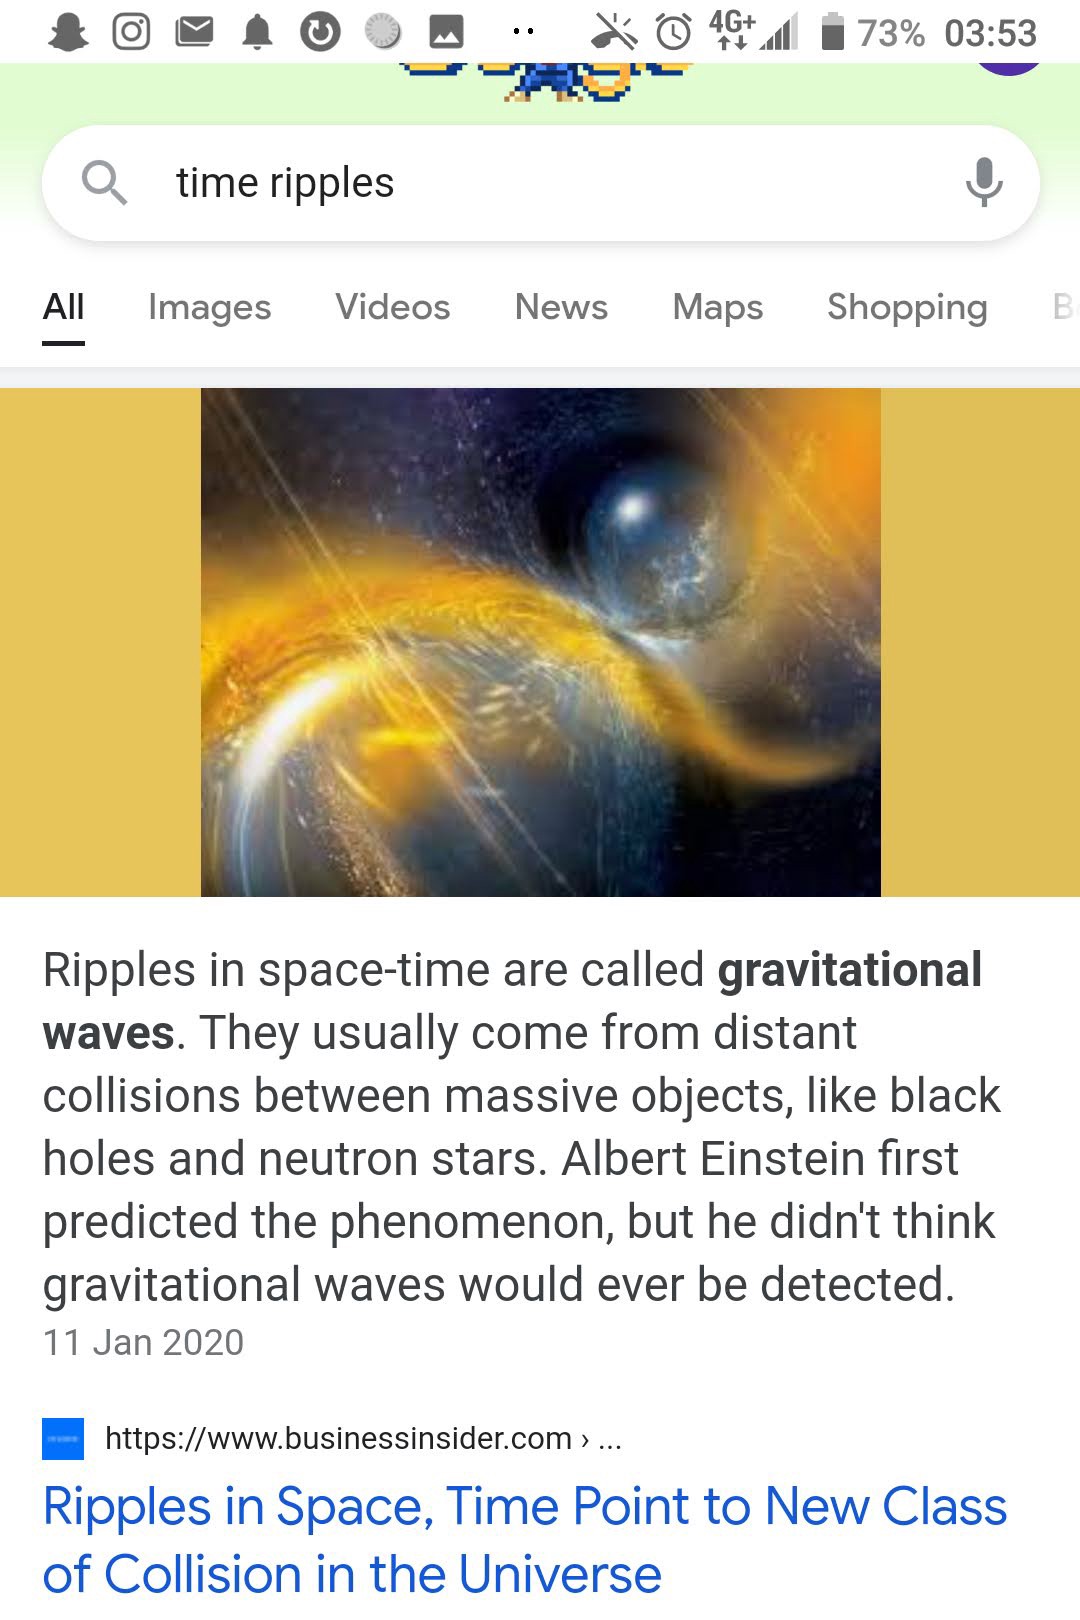 The first search result for time ripples on Google. The definition from Business Insider states: Ripples in space-time are called gravitional waves. They usually come from distant collisions between massive objects, like black holes and neutron stars. 